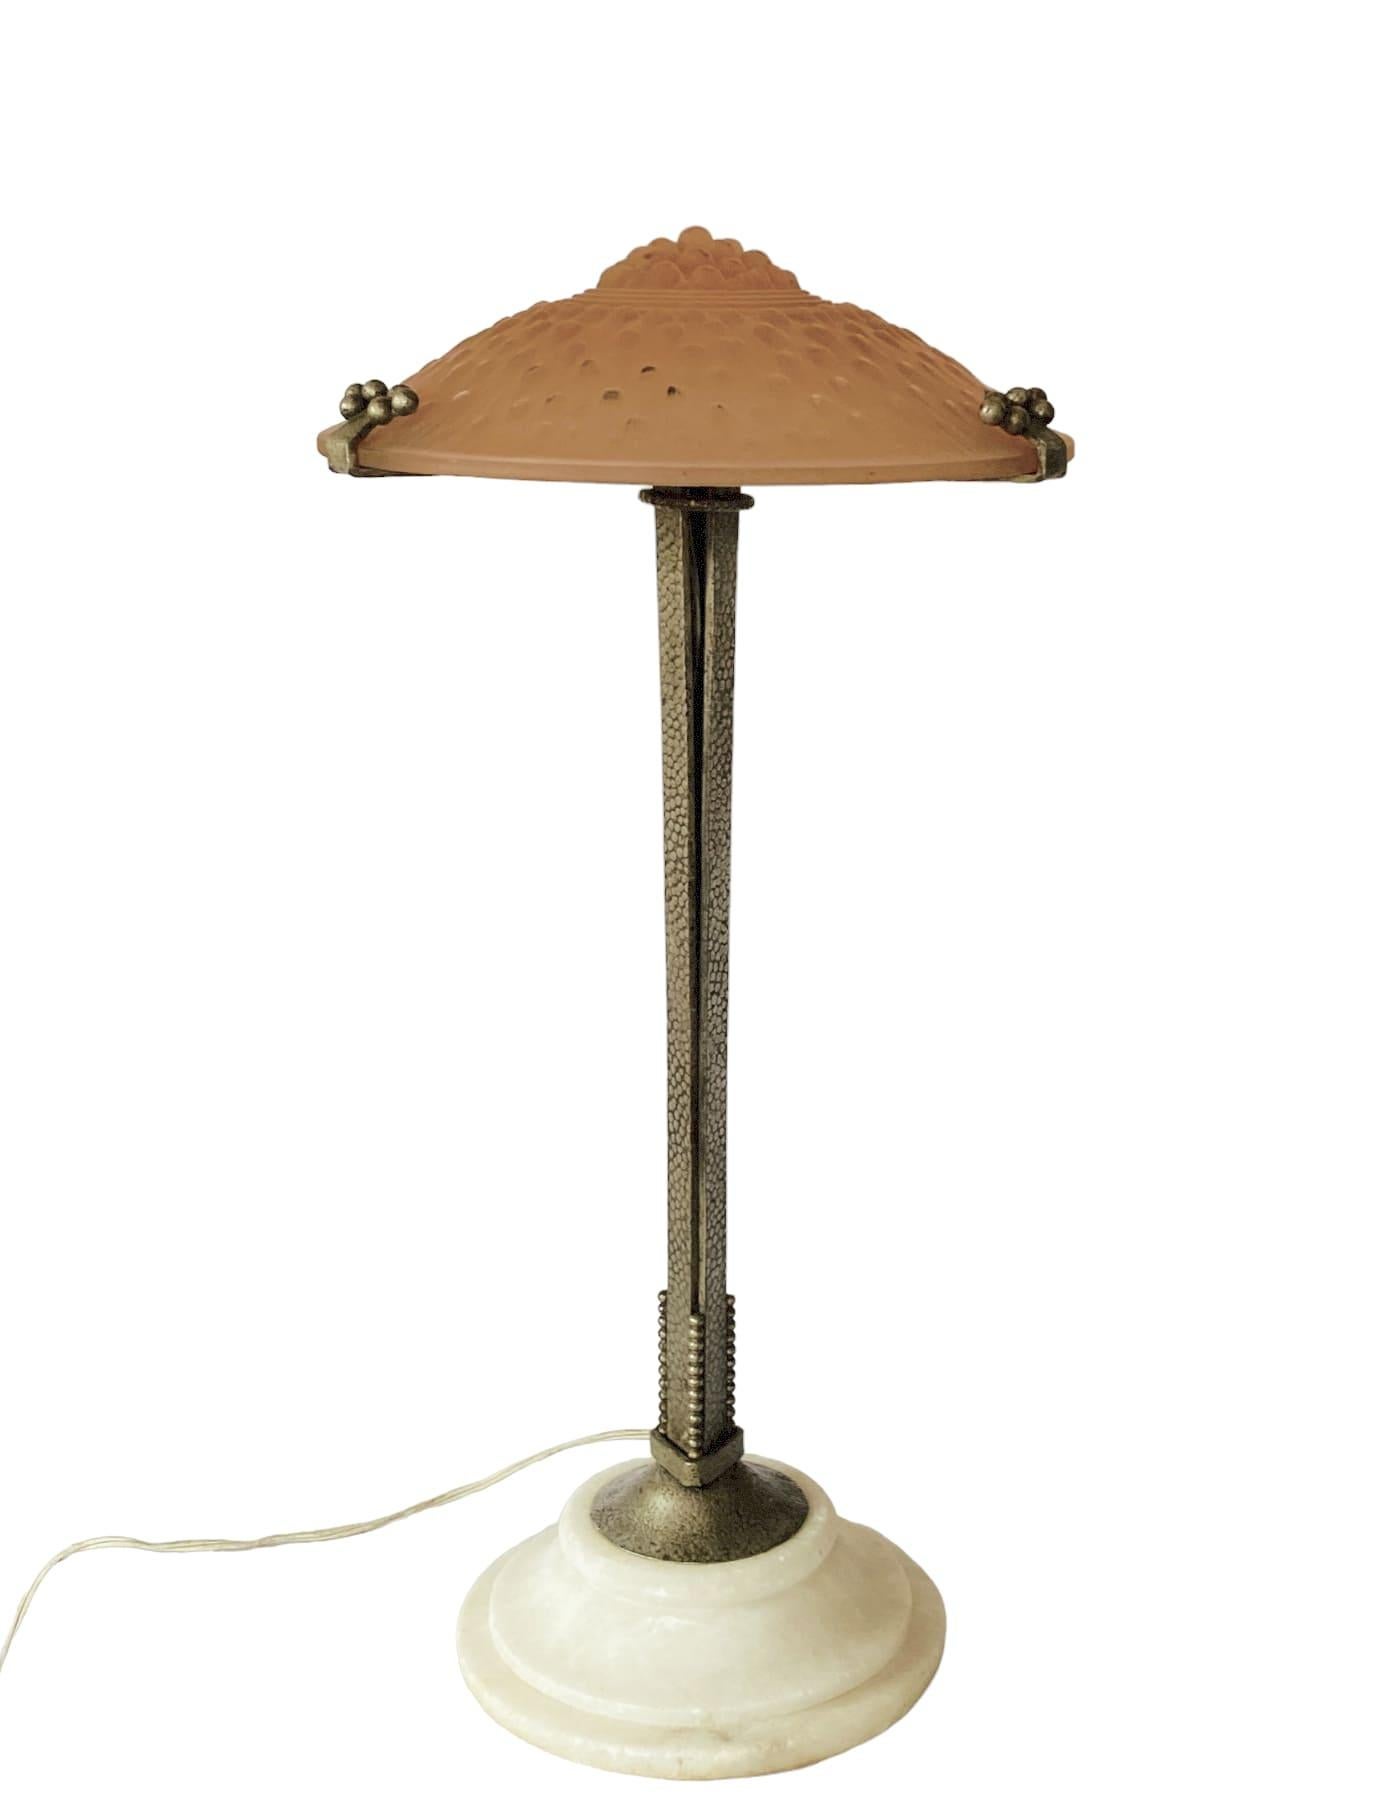 Monumental rare Art Deco table lamp.

Muller Freres Luneville, France, circa 1920s

attributed to Edgar Brandt

Bubbles decorations on pink glass. Hand decorated iron. Important alabaster base.

Signed “Muller Freres Luneville”

Measures :